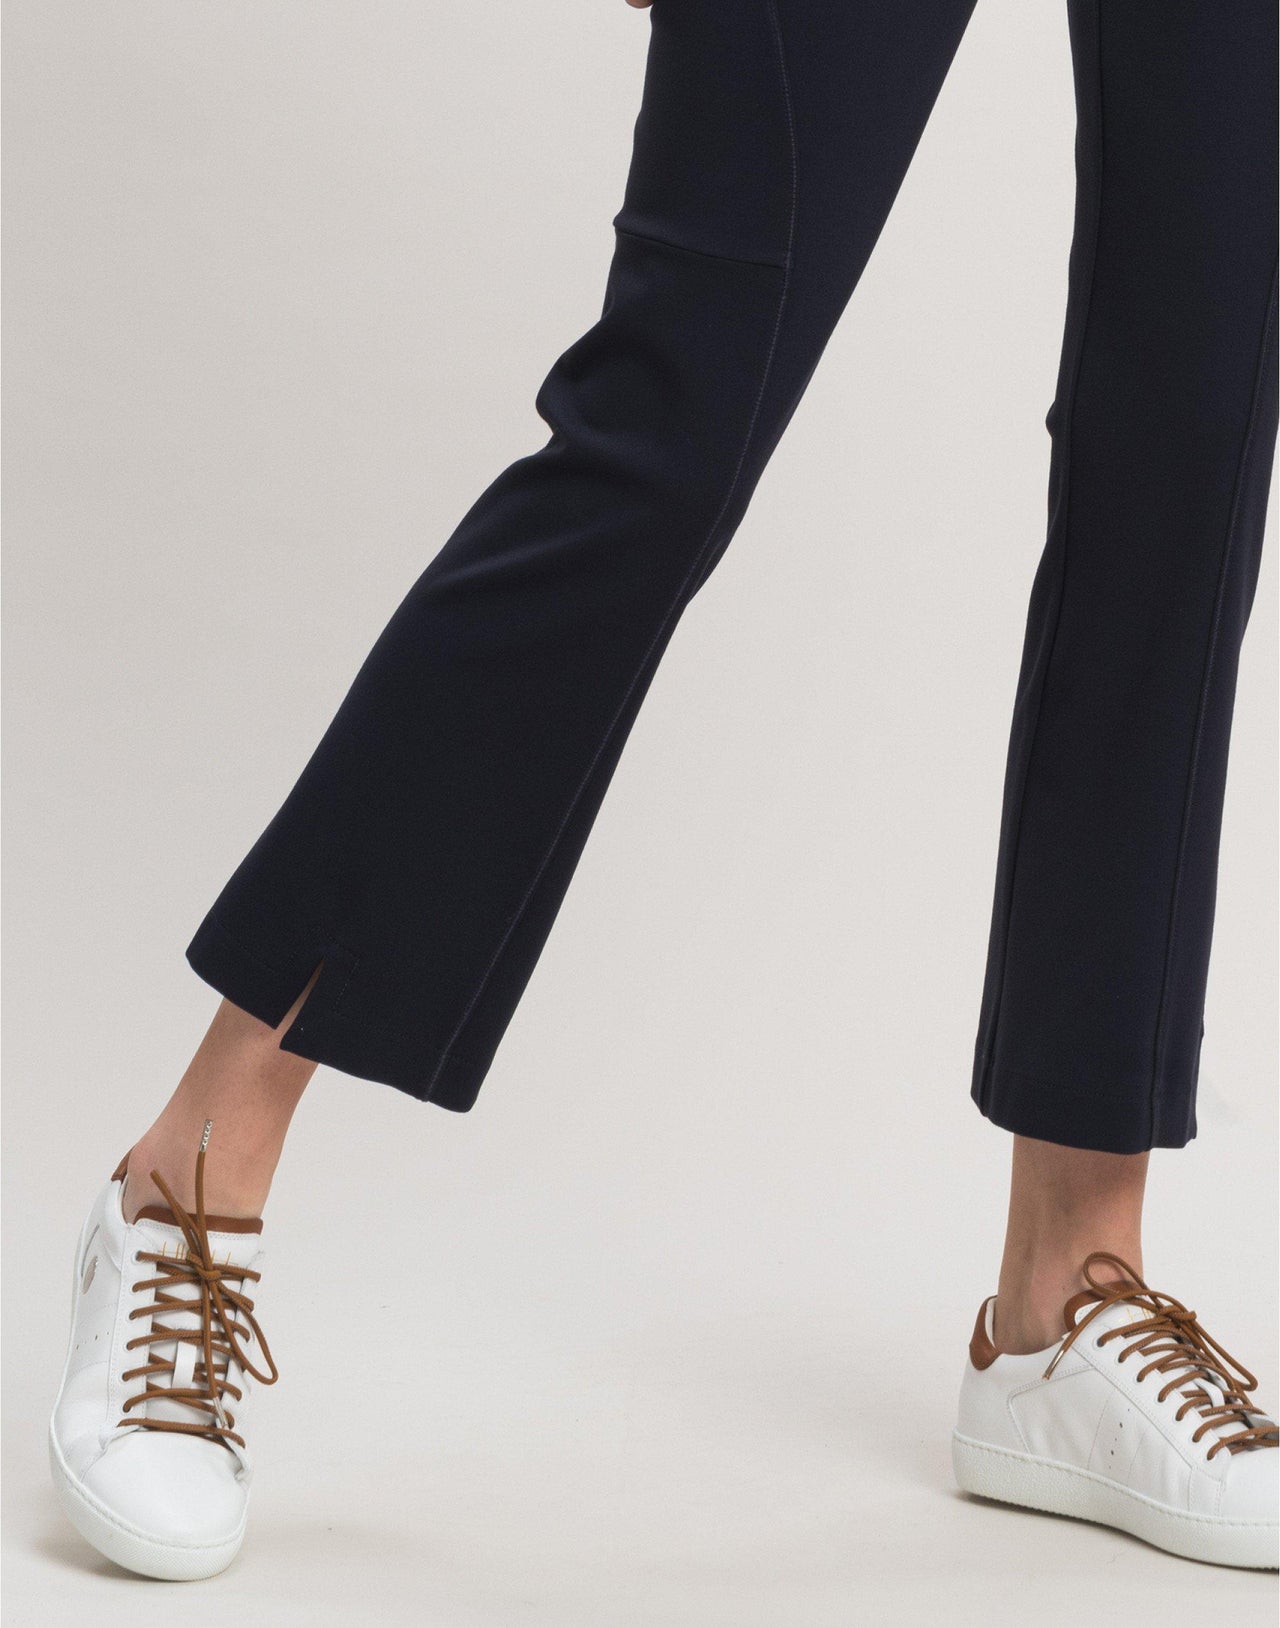 Raring Pant.-Pant-High by Claire Campbell-Debs Boutique